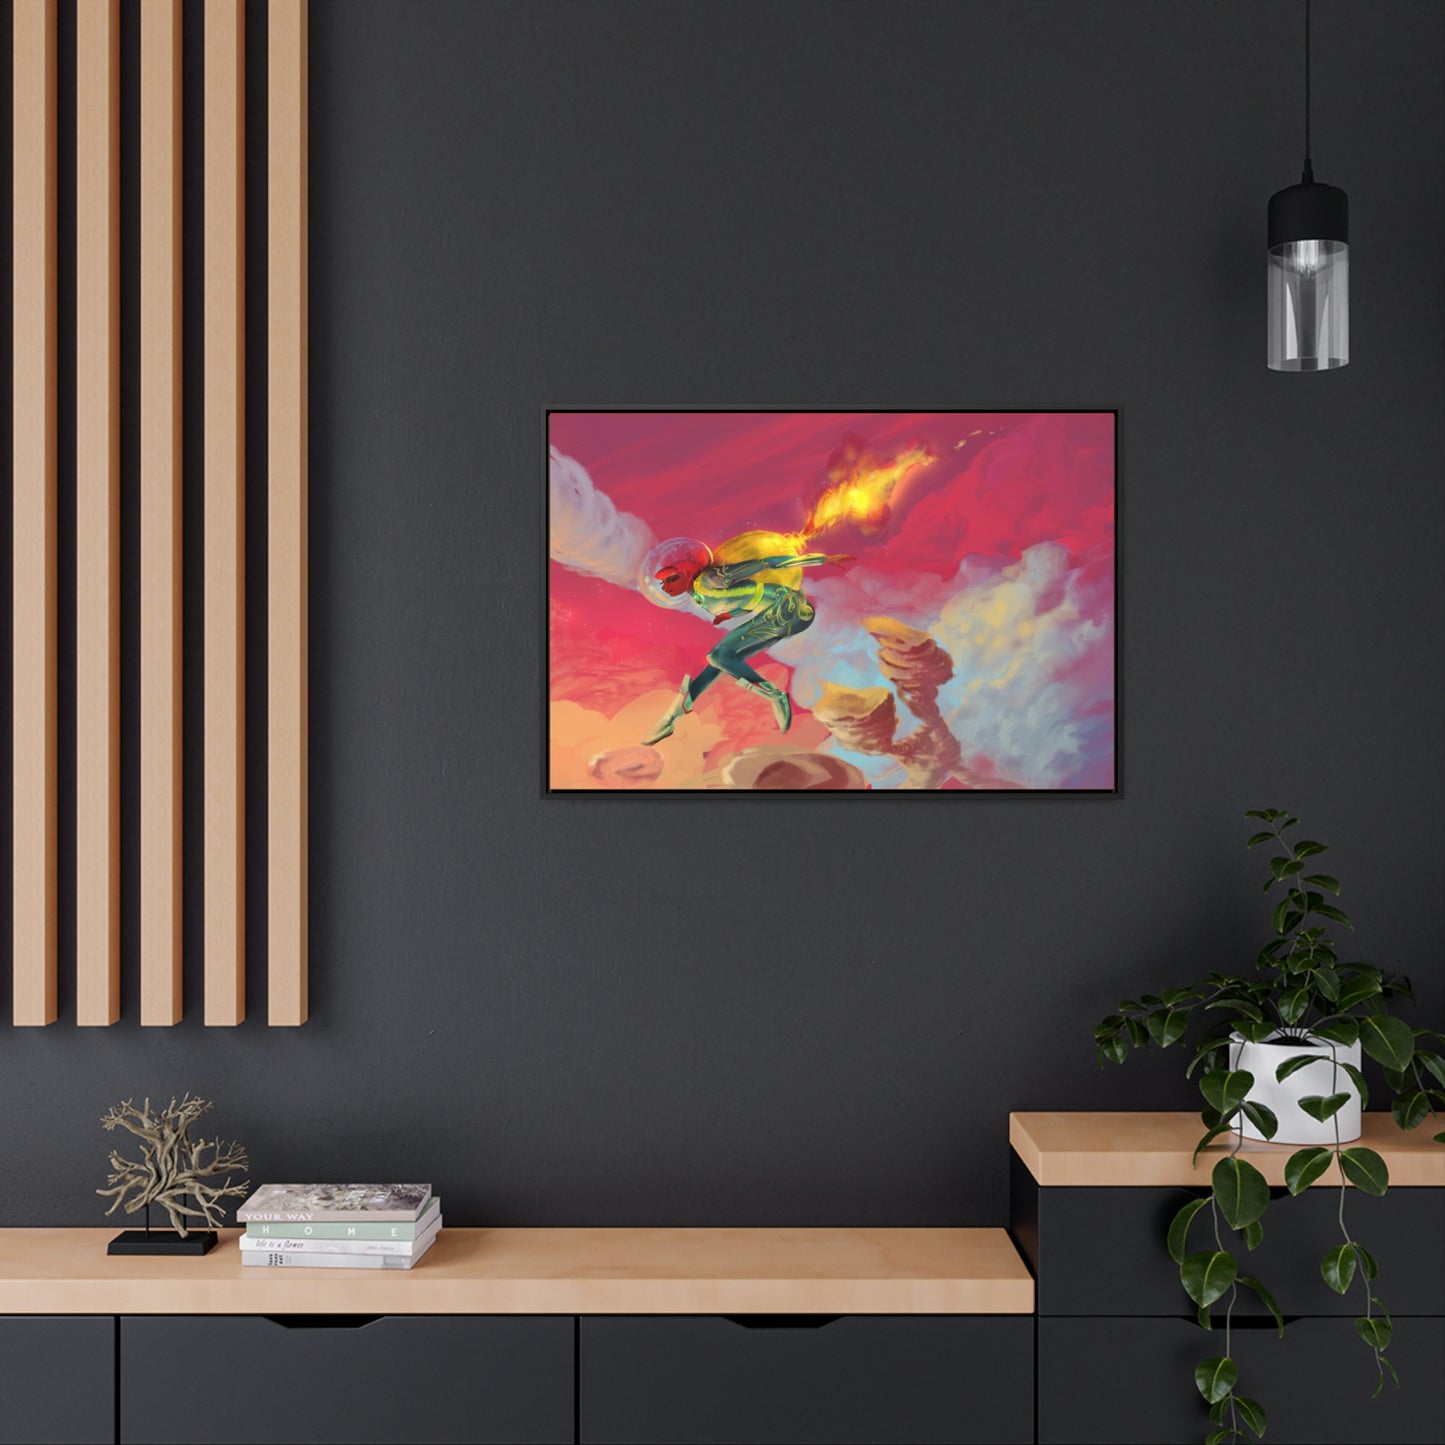 Doin Me a Space - Gallery Canvas Wraps, Horizontal Frame